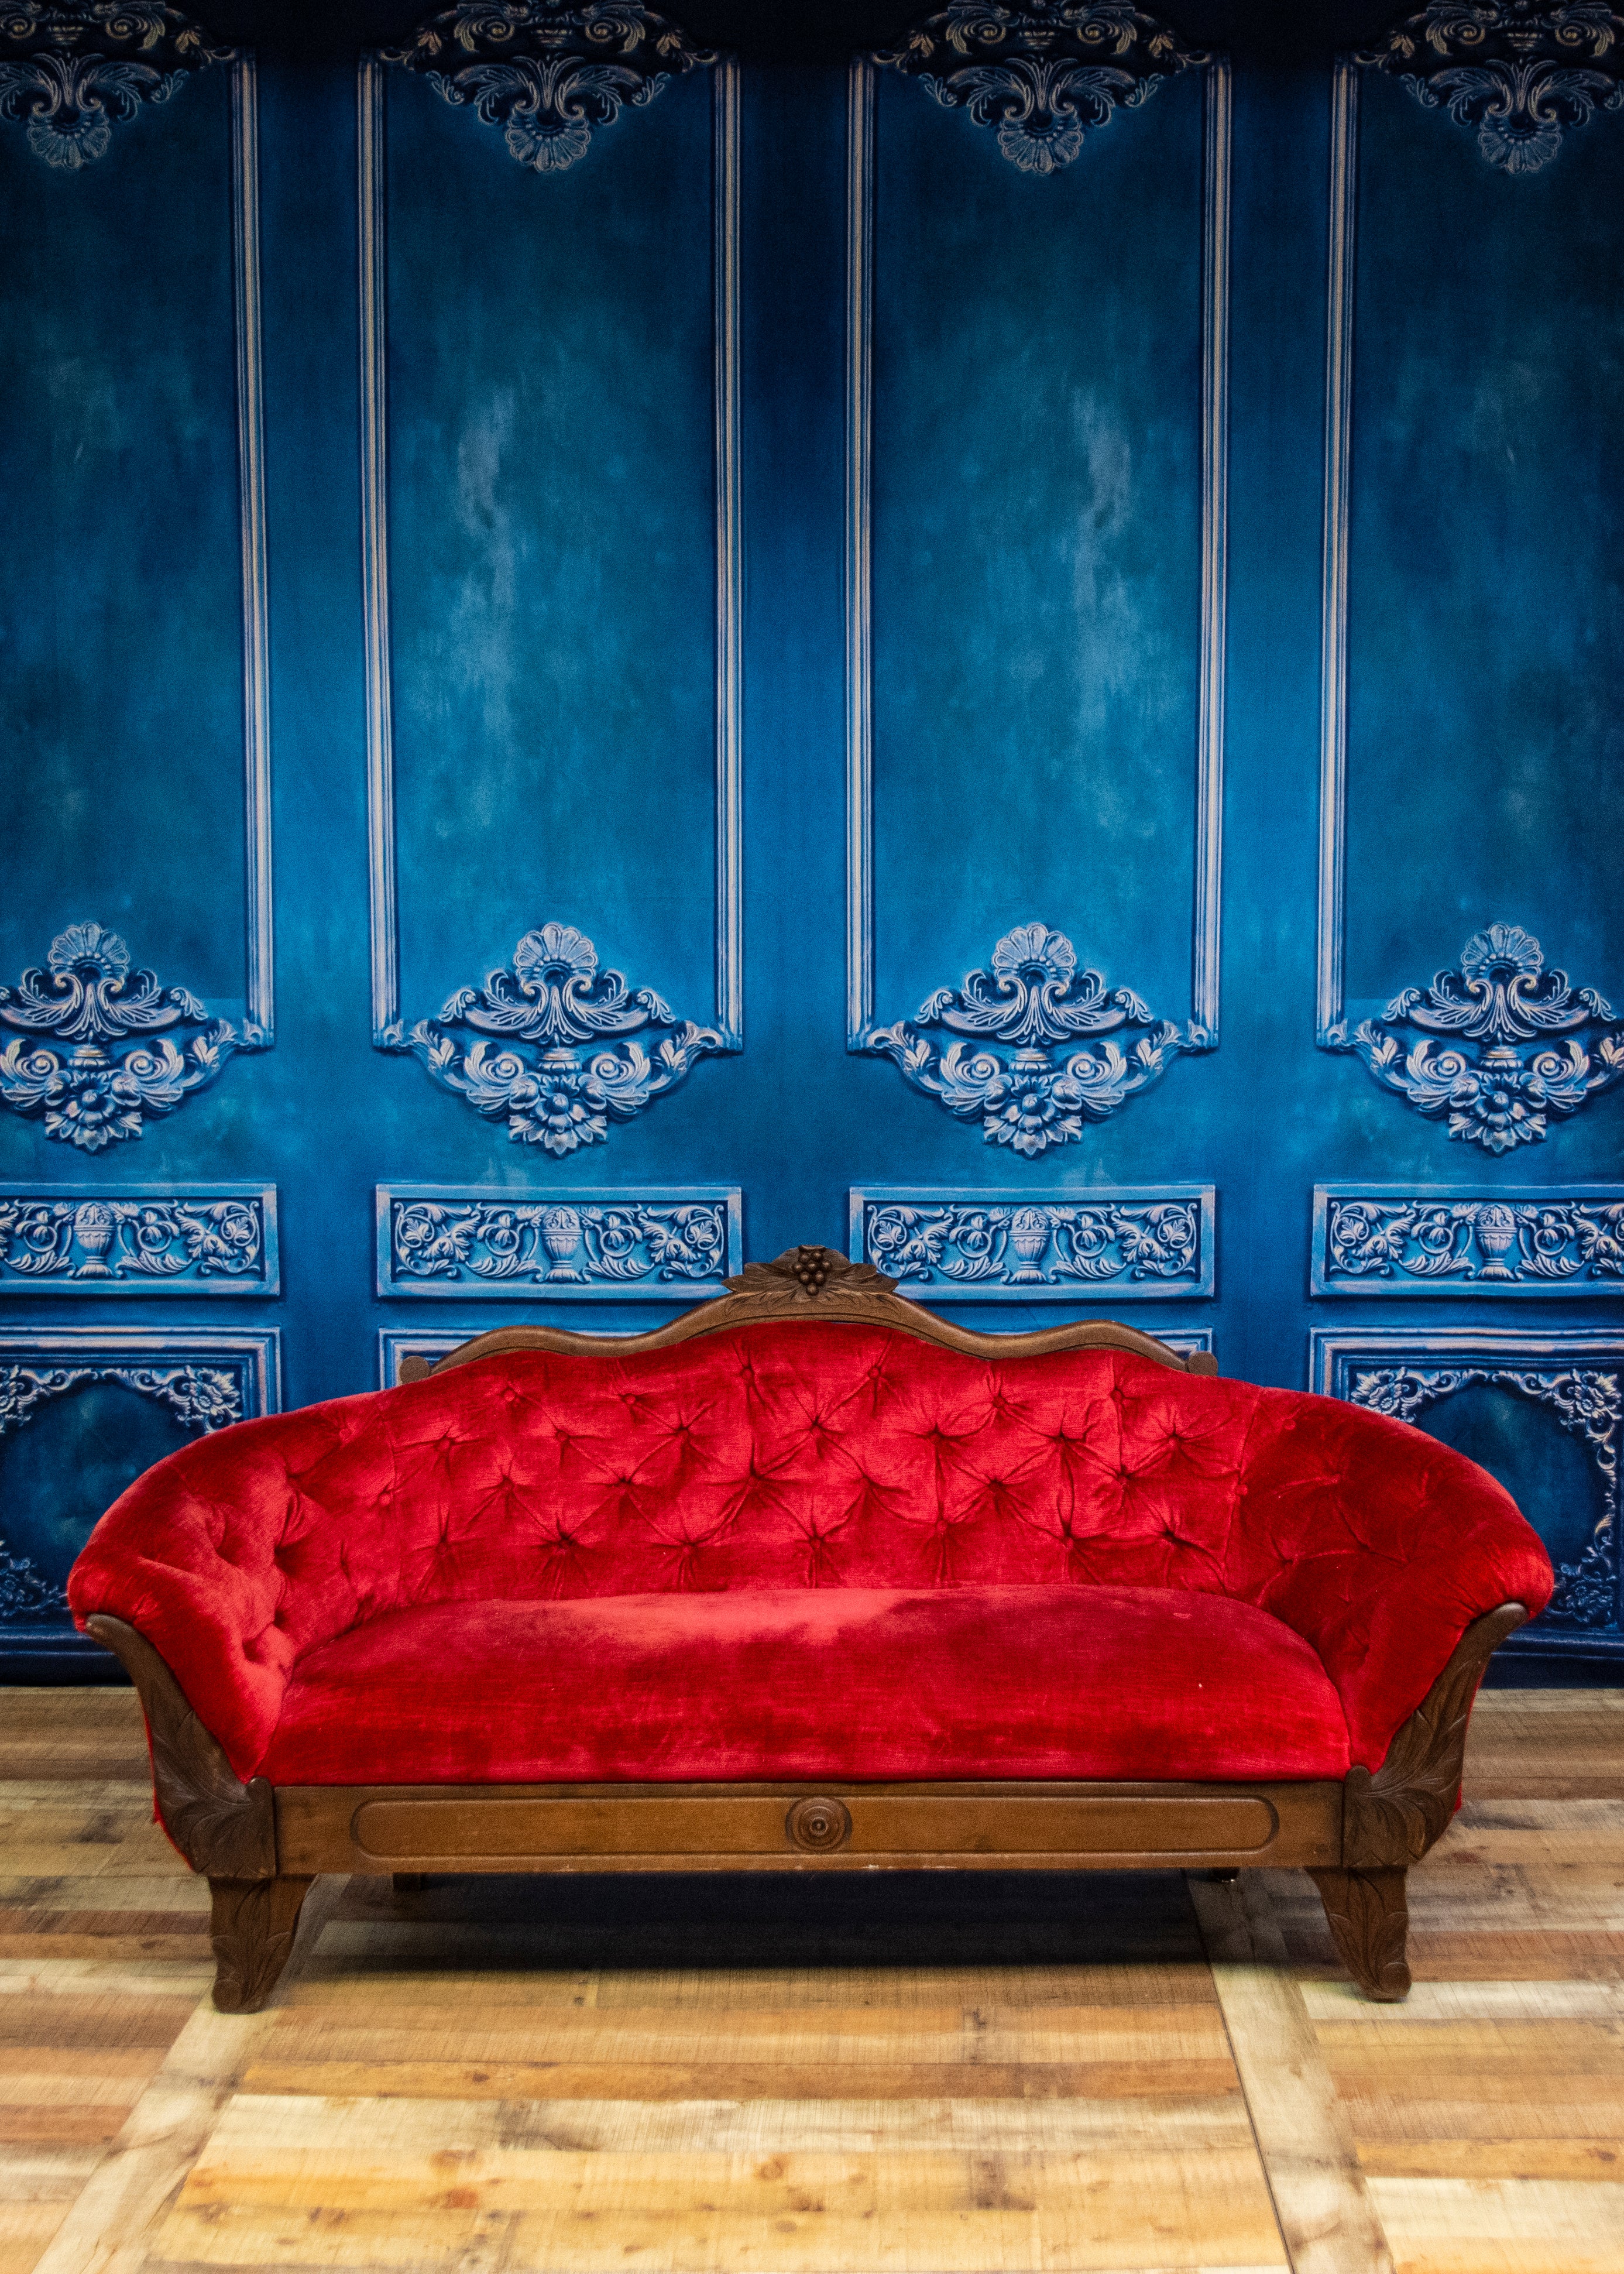 Kate Bule Wall and Red Sofa Designed by Thousand Words Photography